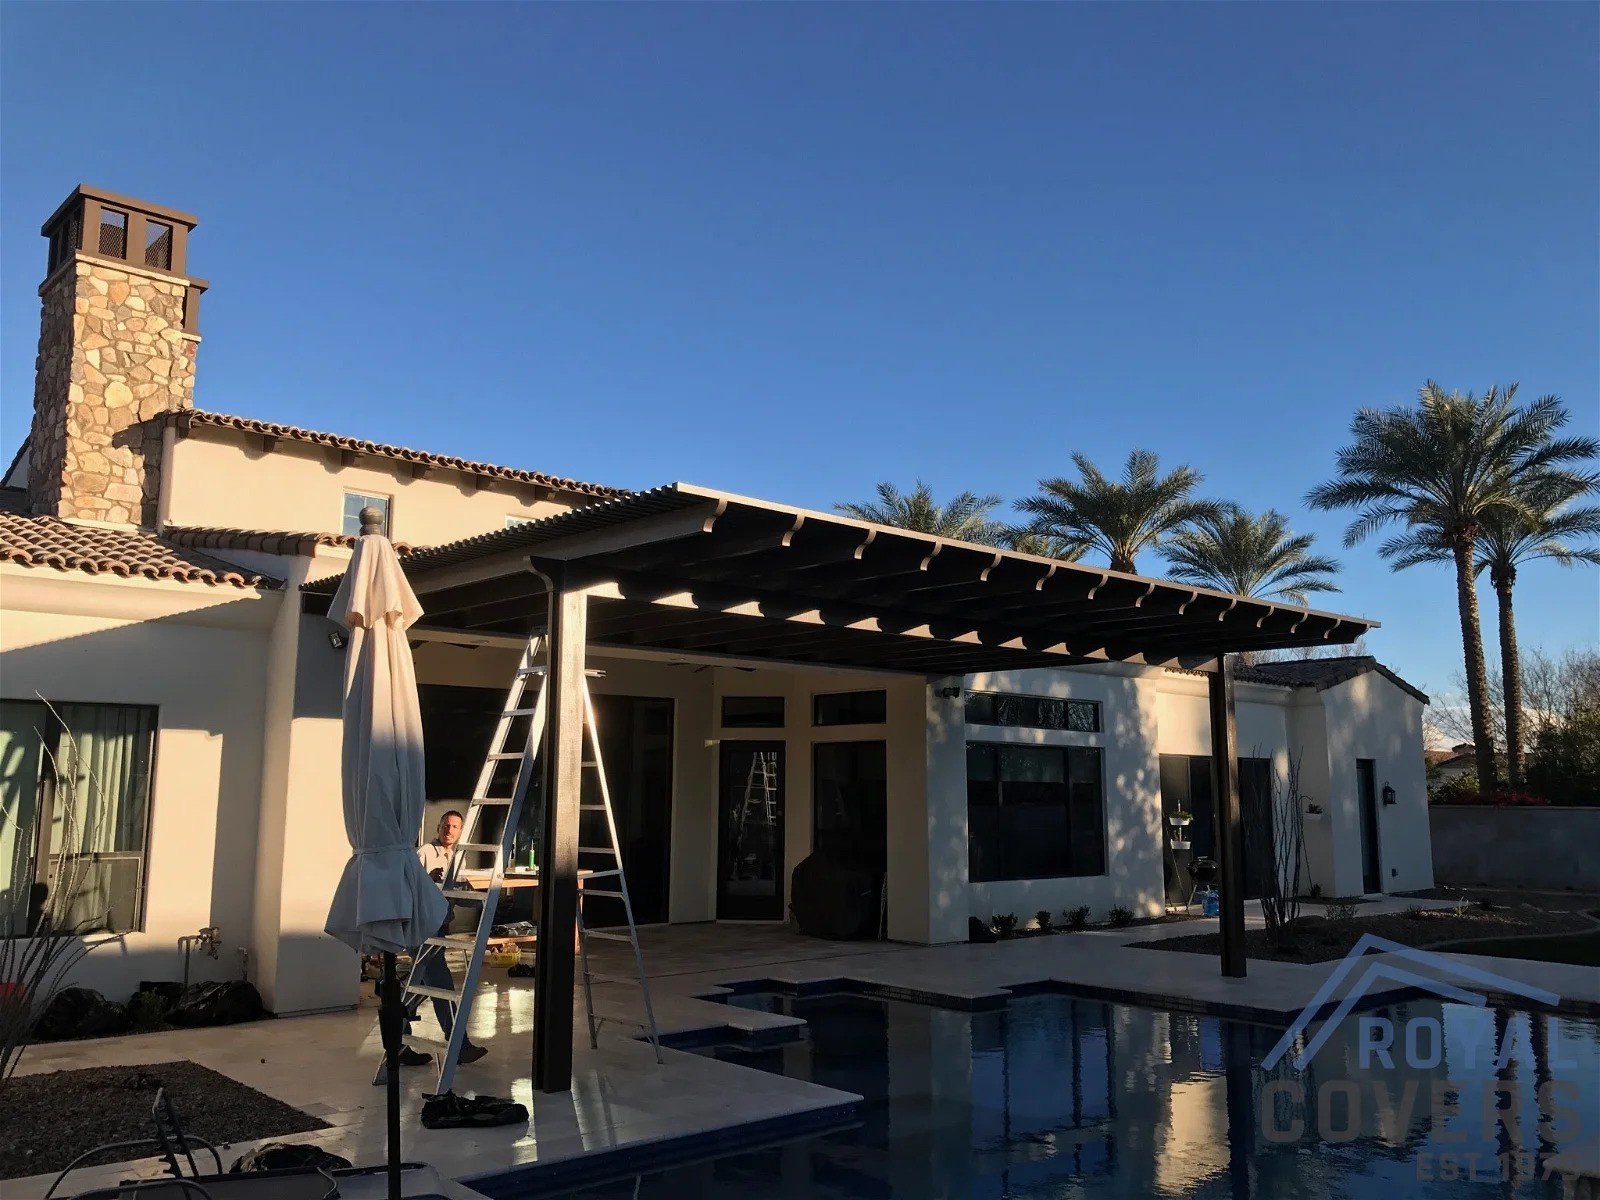 Can a Pergola Have a Solid Roof